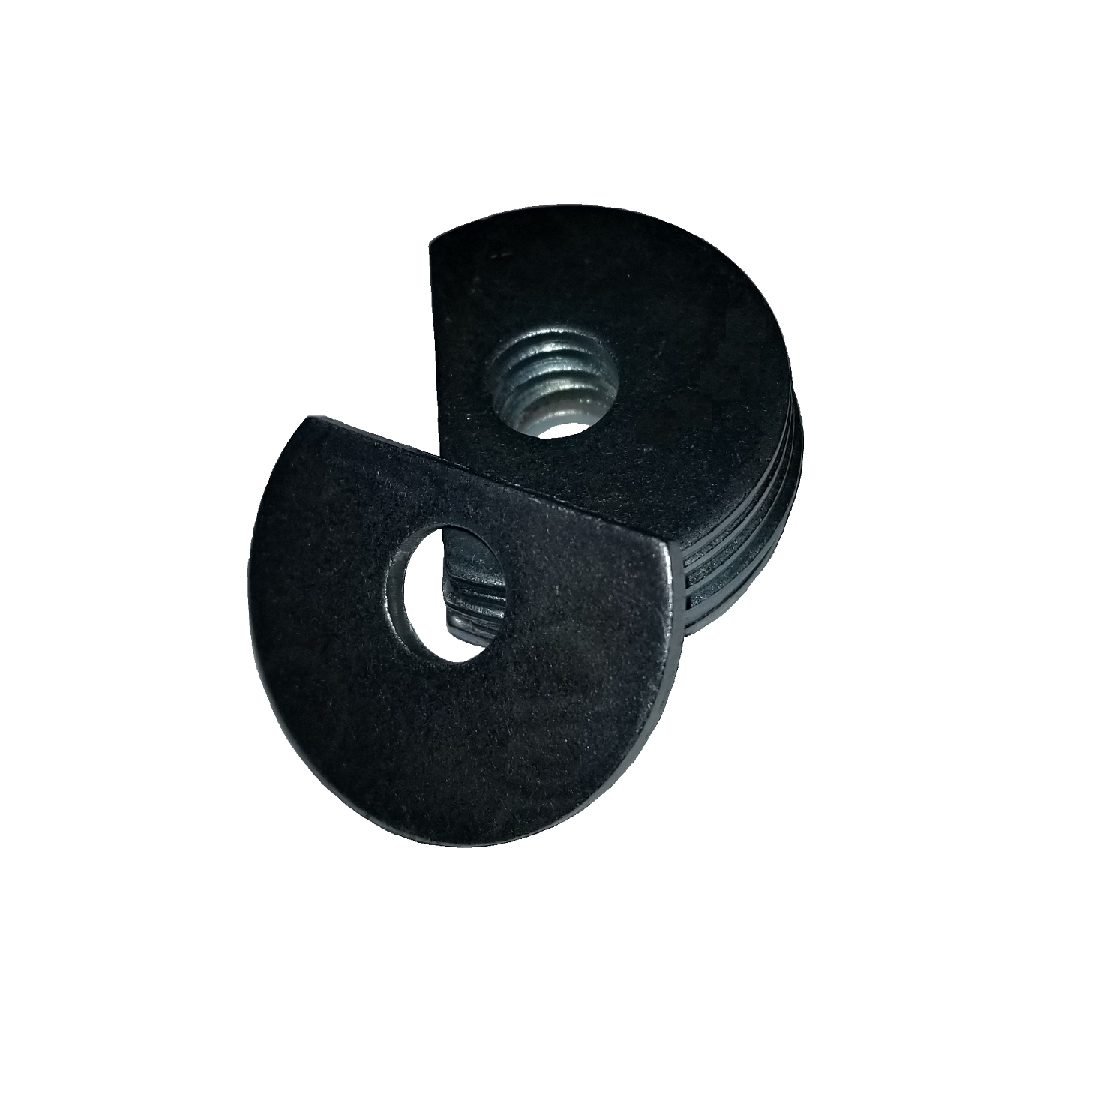 Clipped OD Washer - 0.500 ID, 1.250 OD, 0.190 Thick, Low Carbon Steel - Soft